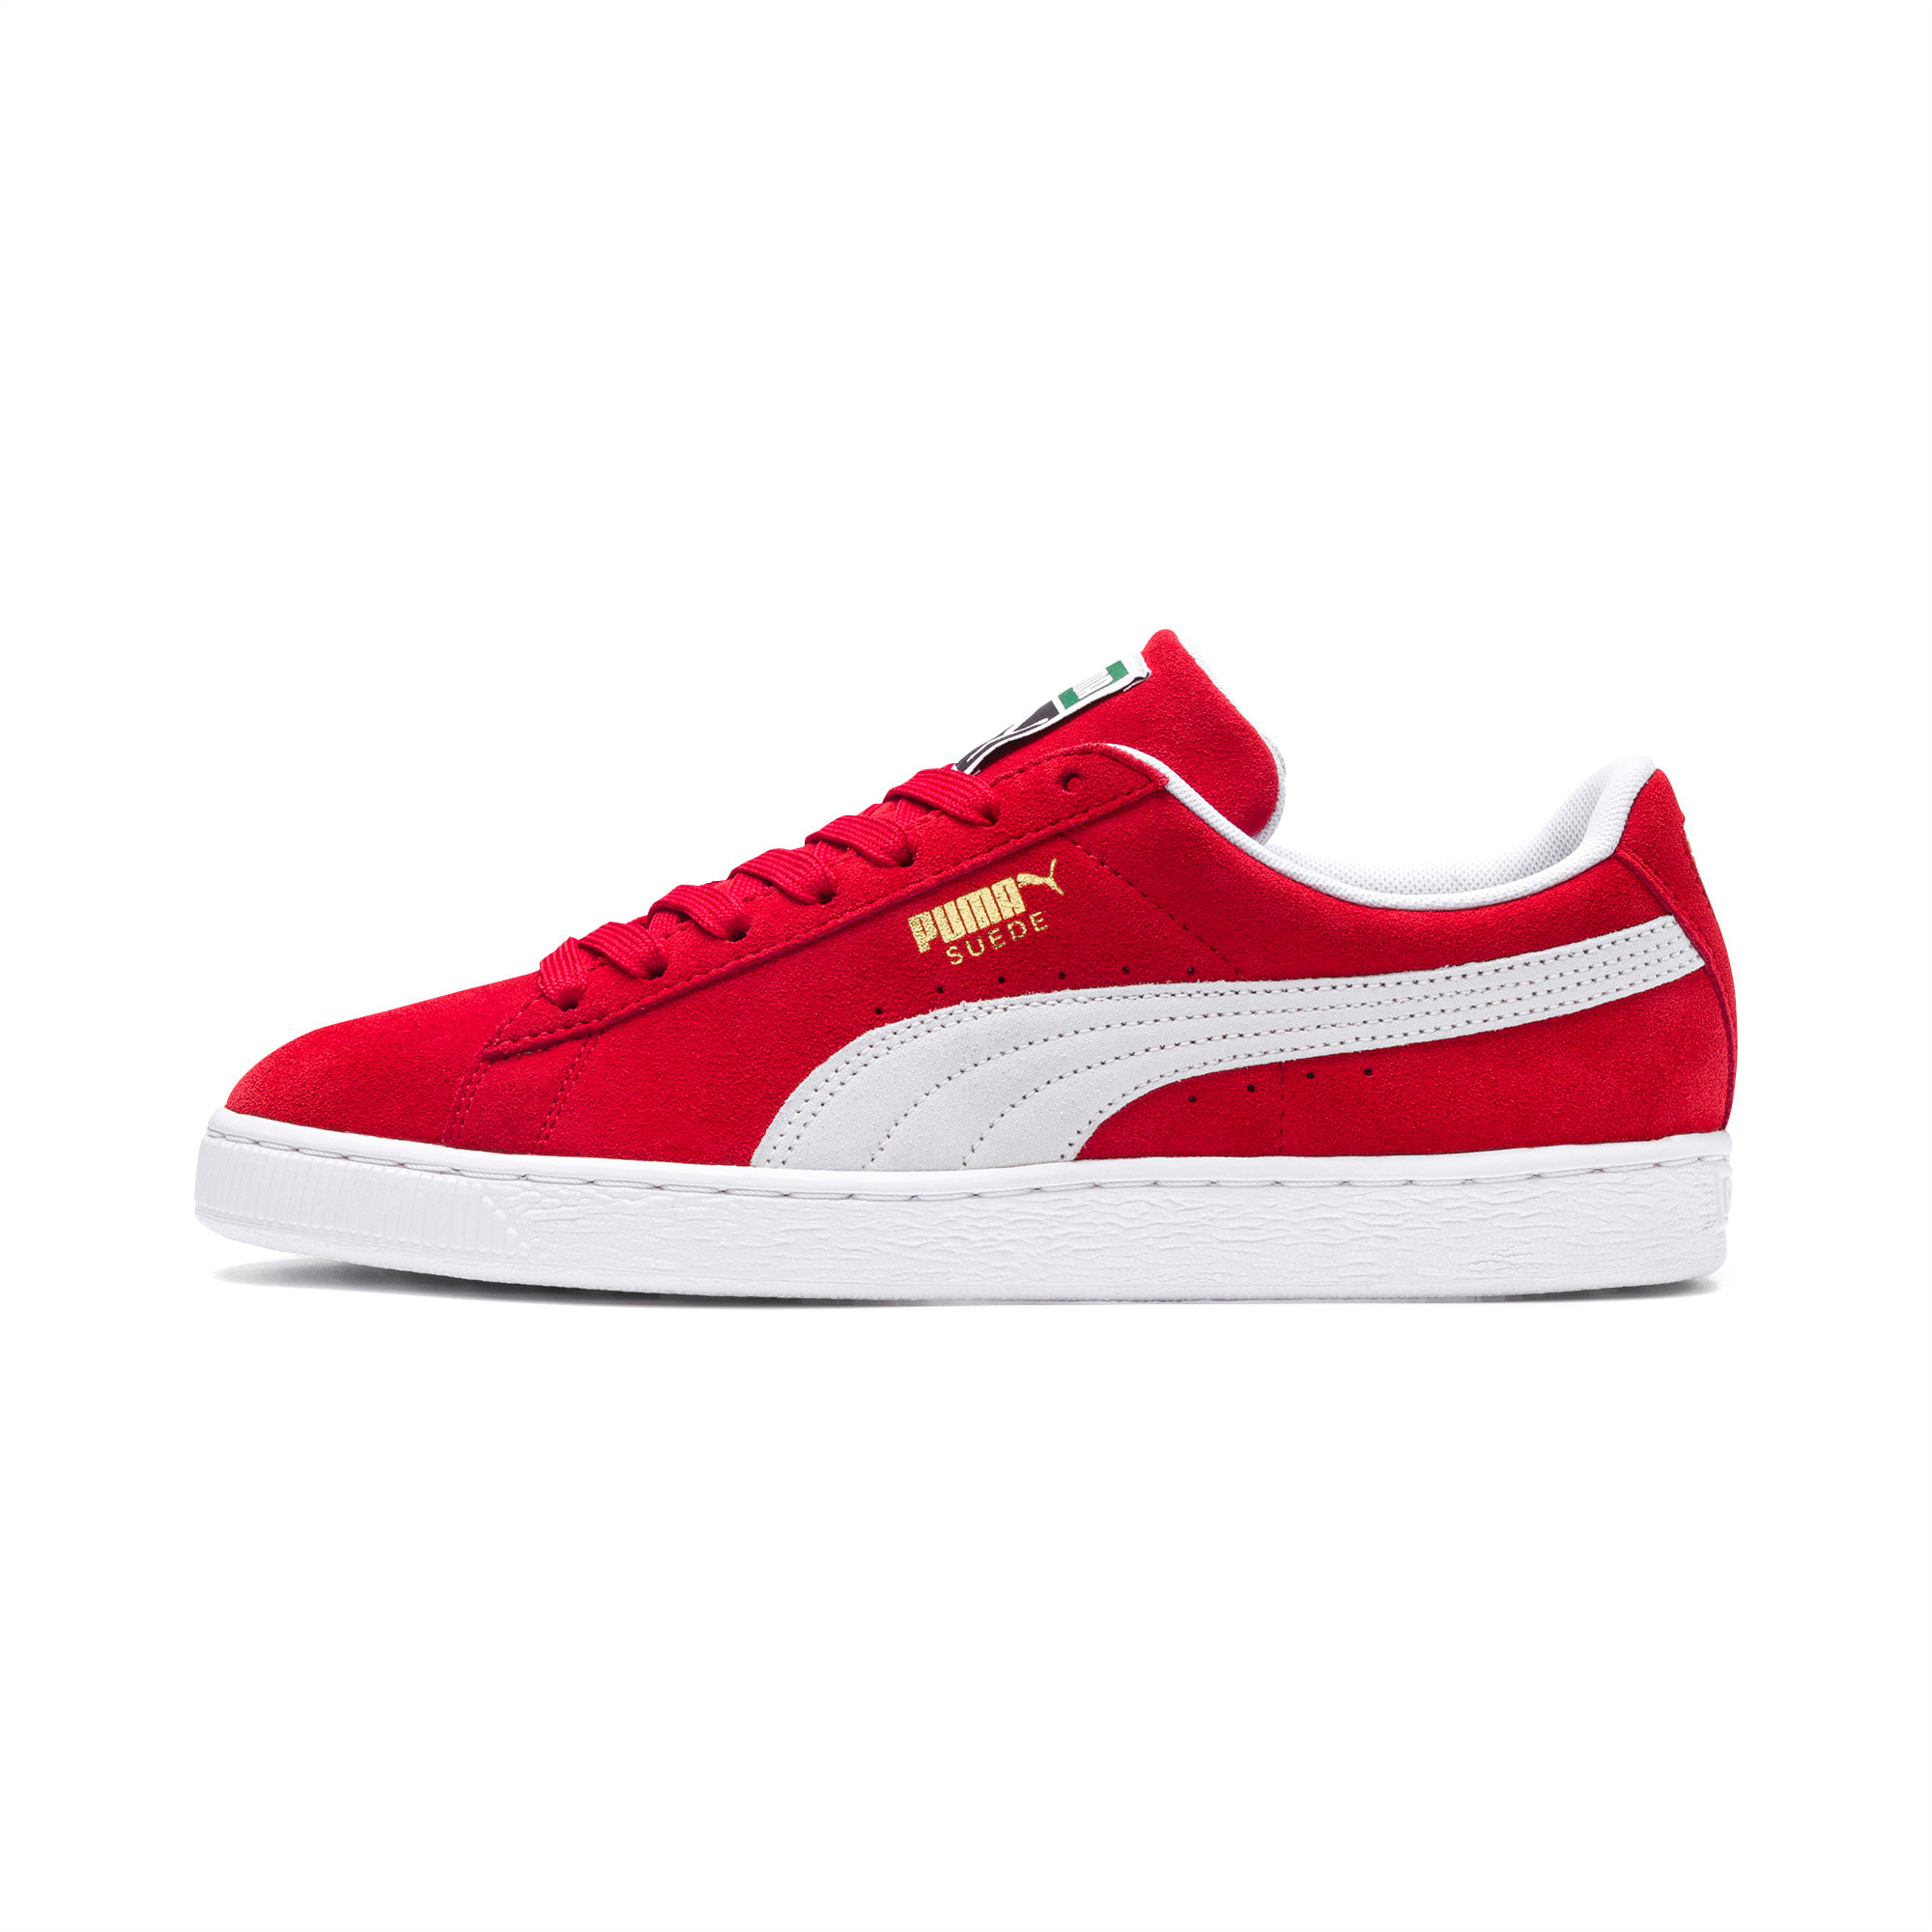 puma suede red sneakers